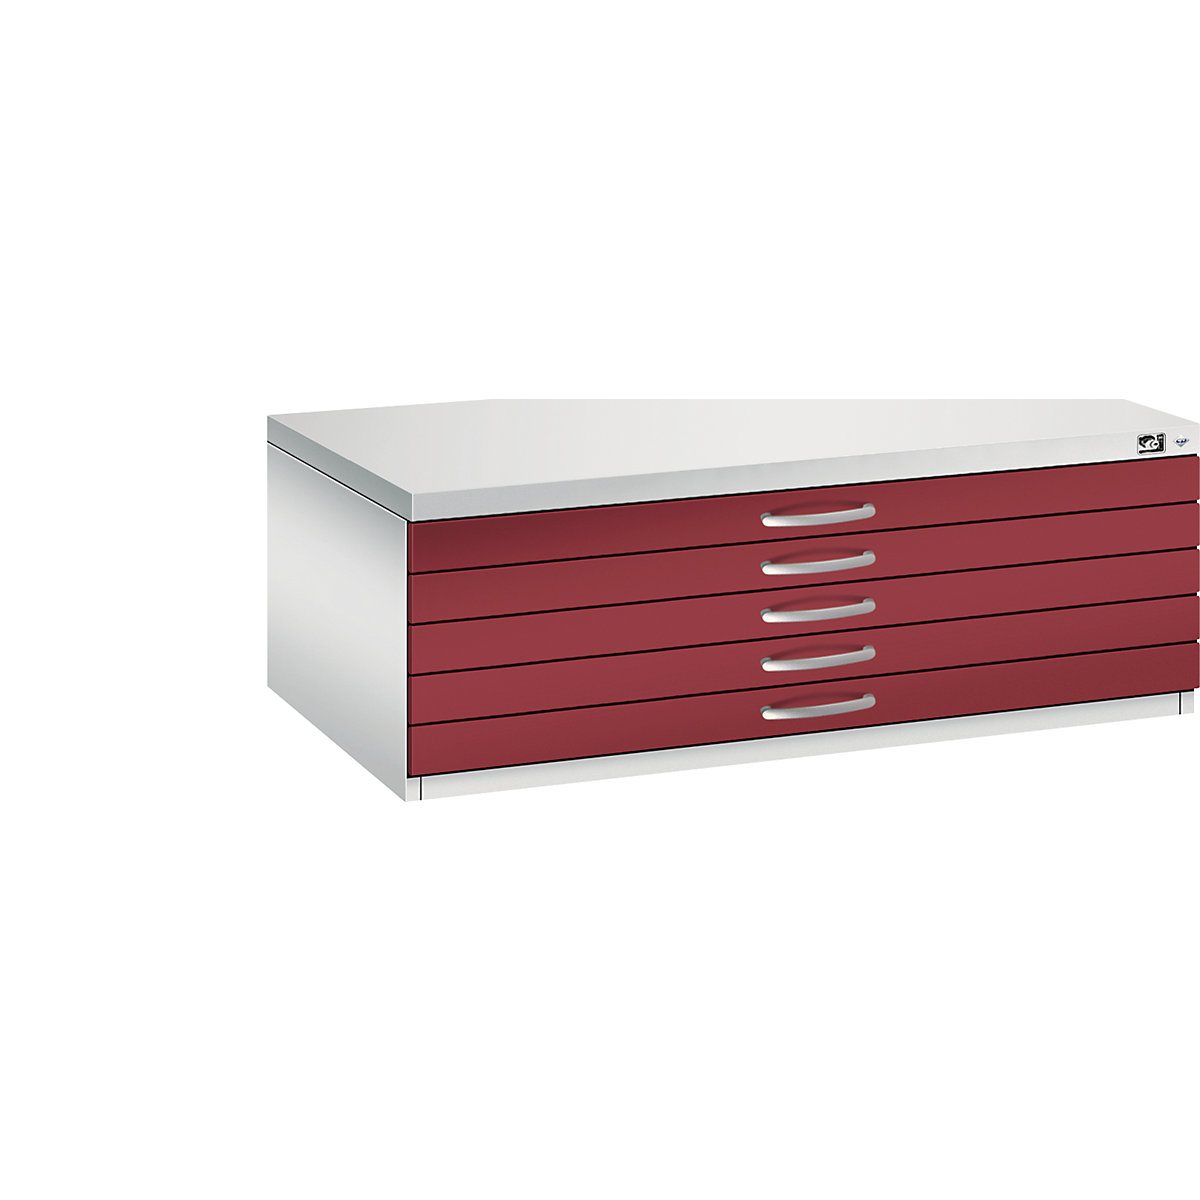 Drawing cabinet – C+P, A1, 5 drawers, height 420 mm, light grey / ruby red-23